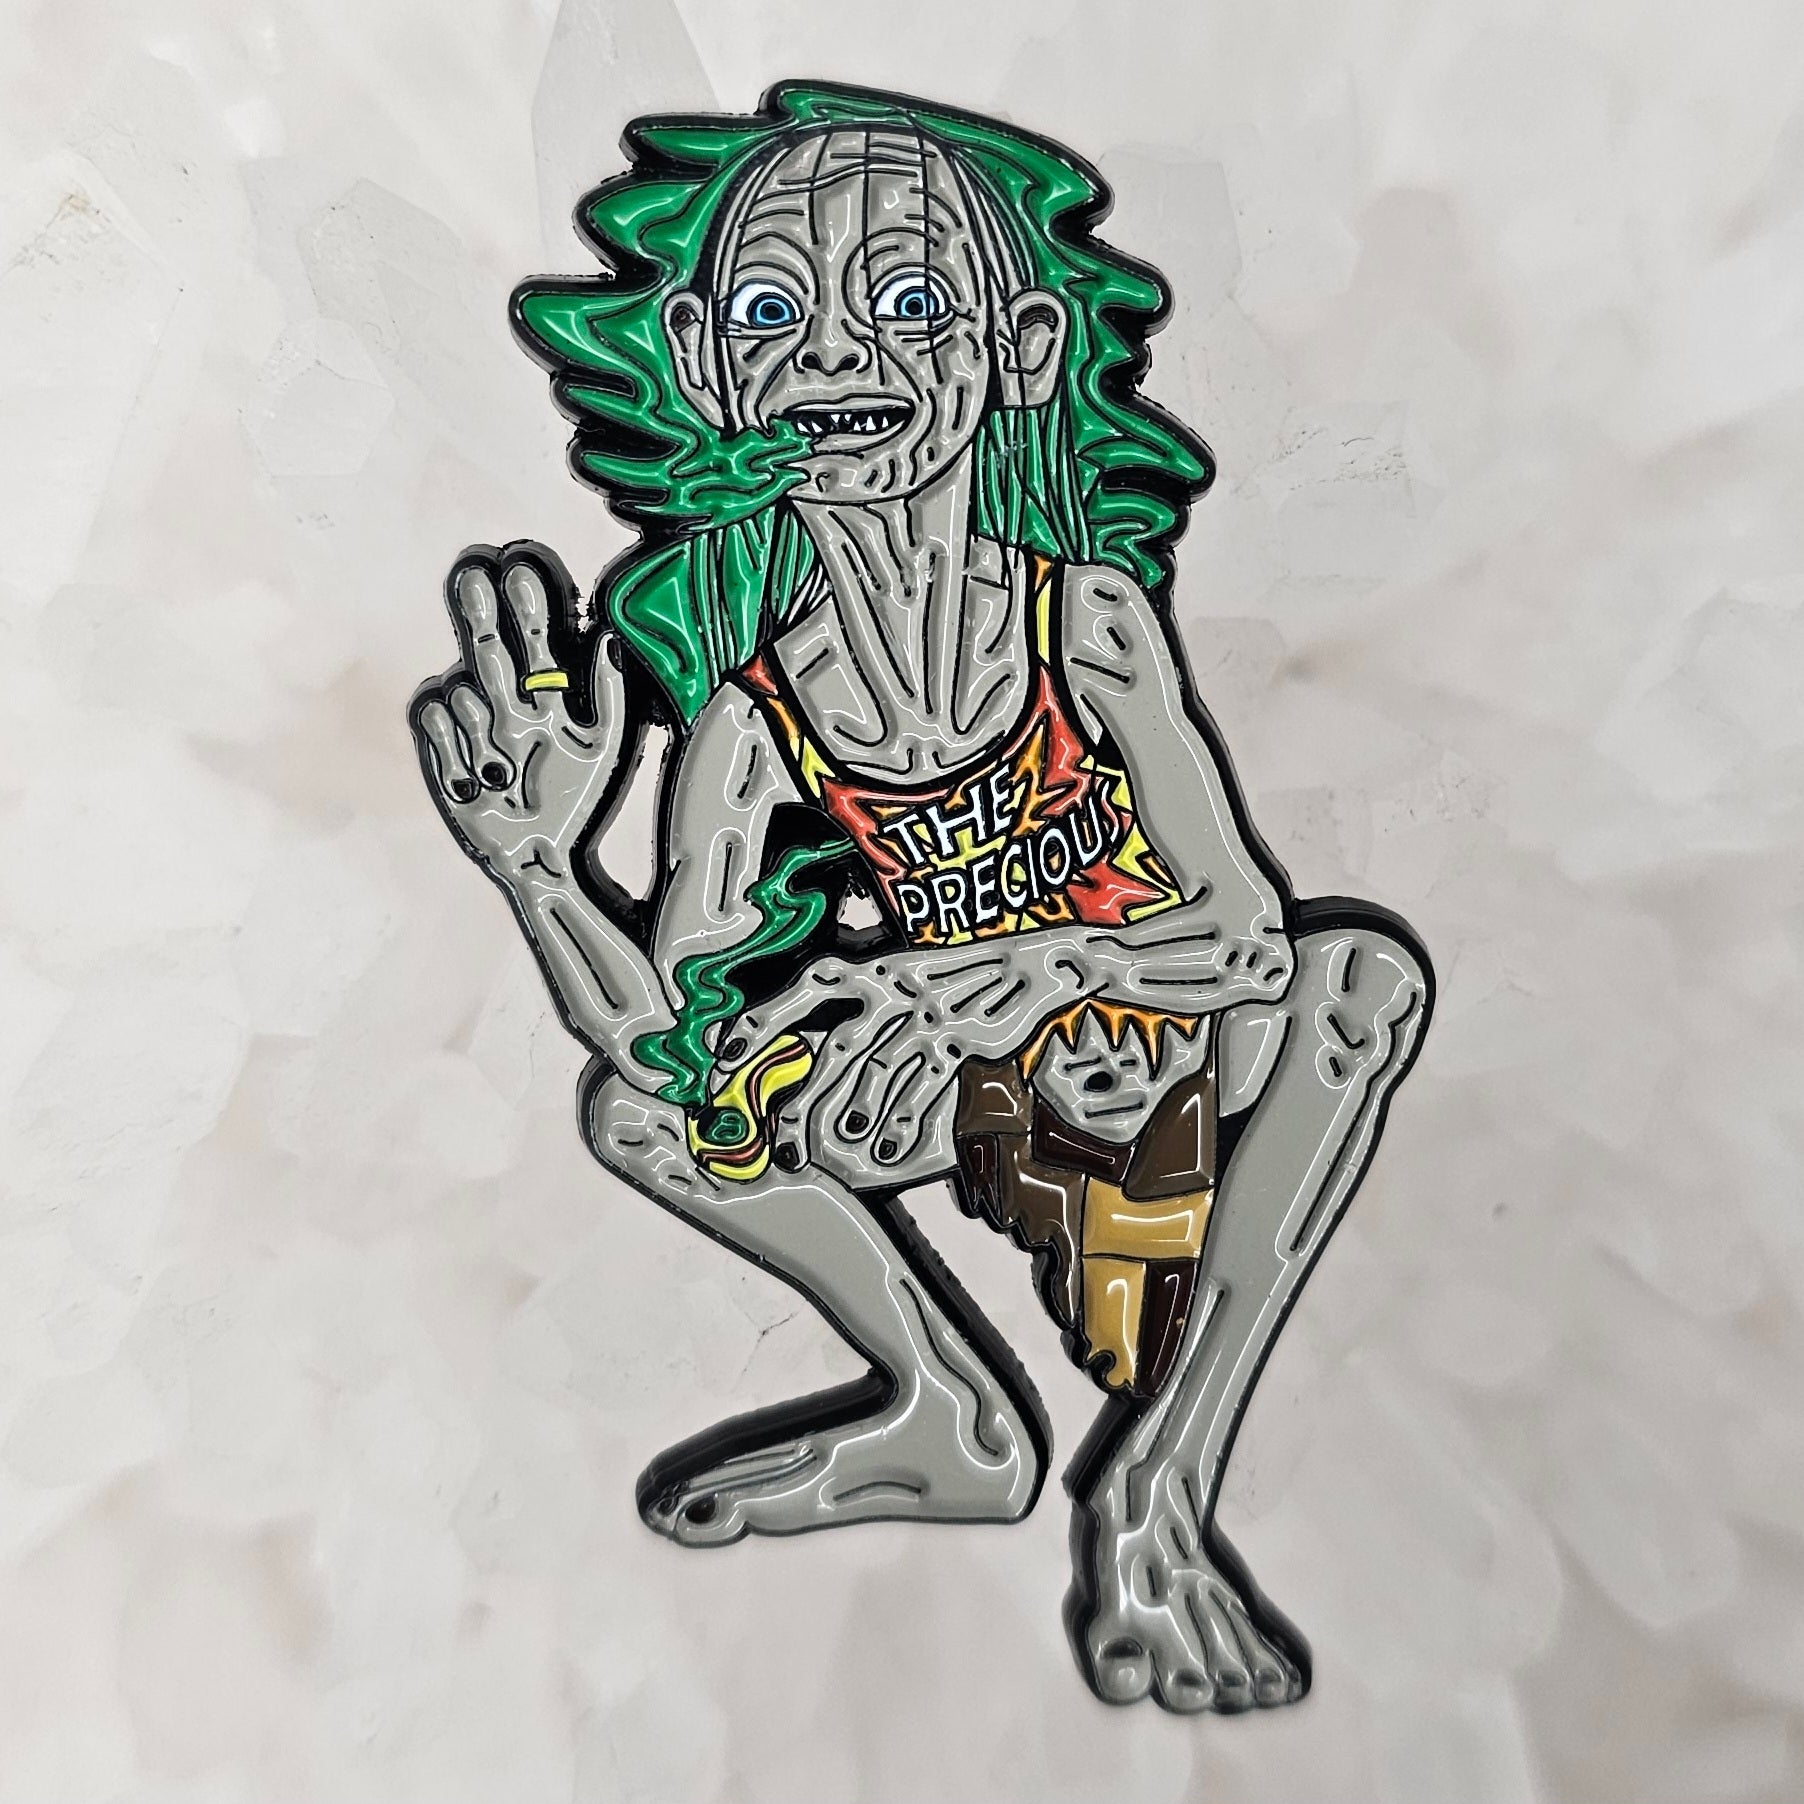 Festie Smeagol The Precious Hippie Lord Of The Weed Gollum Smoke Rings Stoner Enamel Pins Hat Pins Lapel Pin Brooch Badge Festival Pin